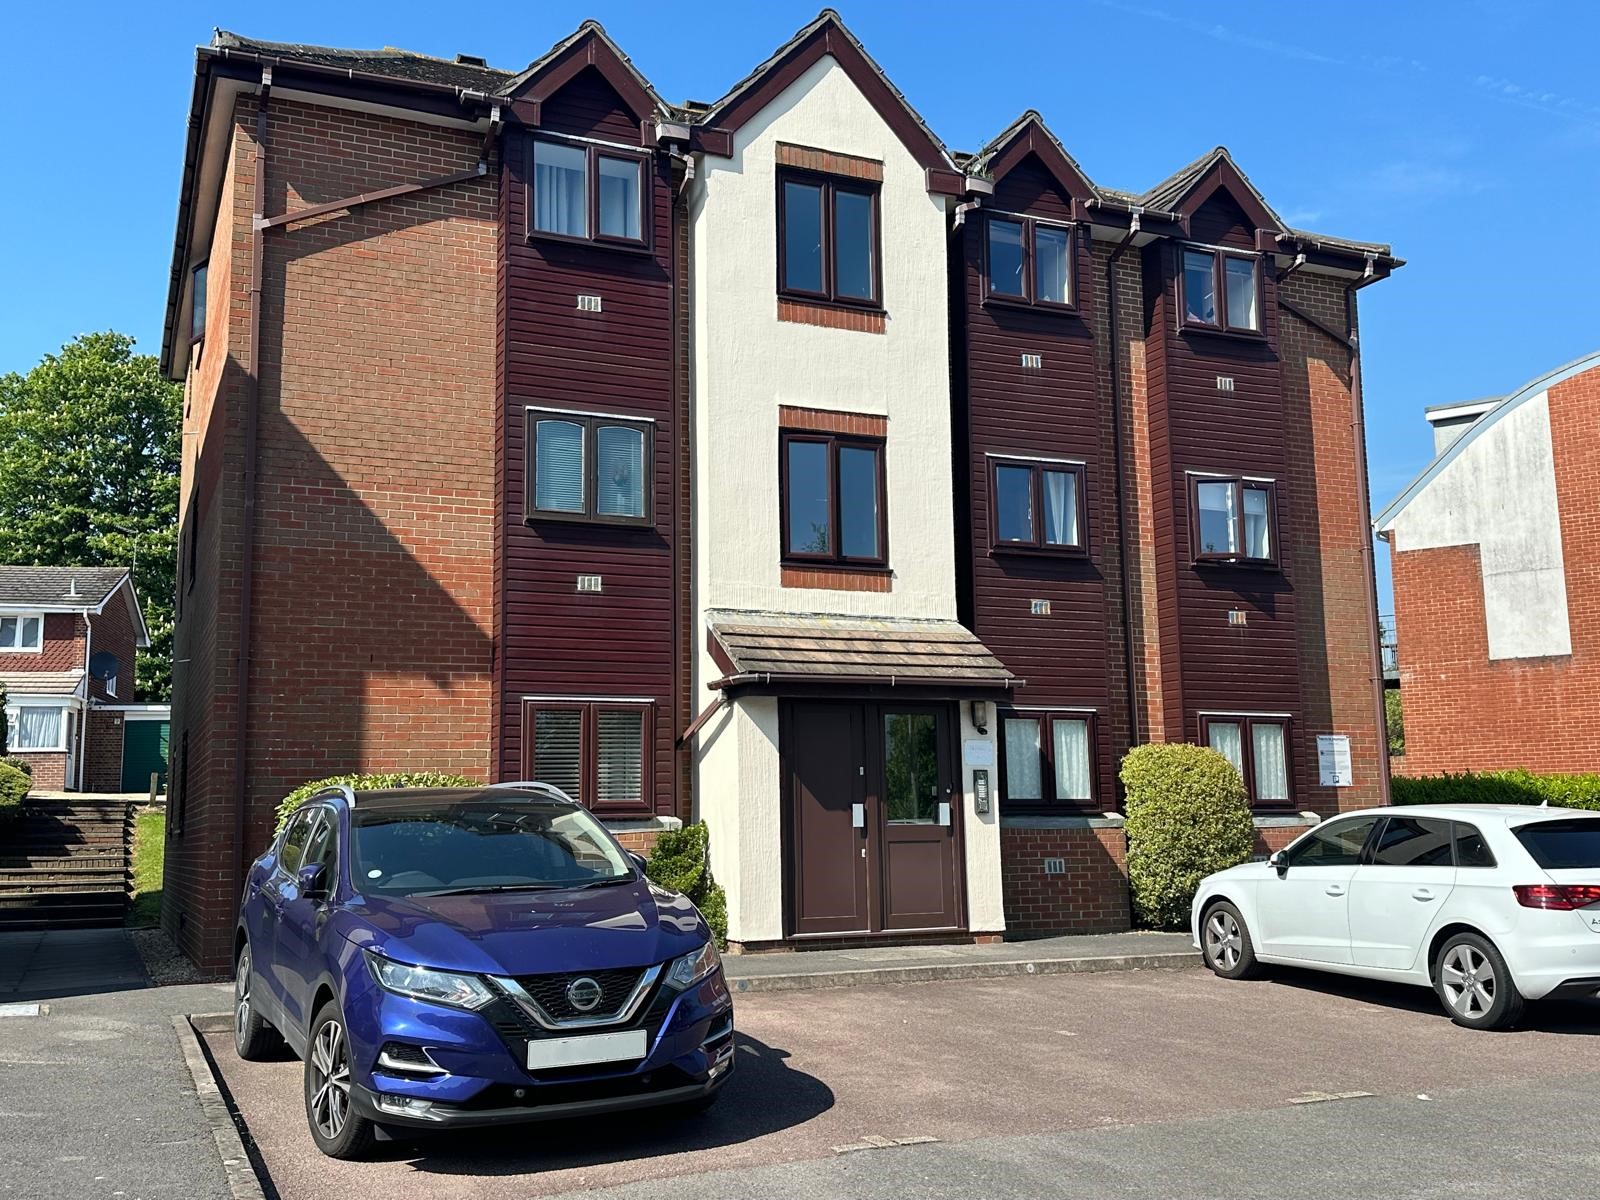 1 bed Flat for rent in Fareham. From Pearsons Estate Agents - Fareham